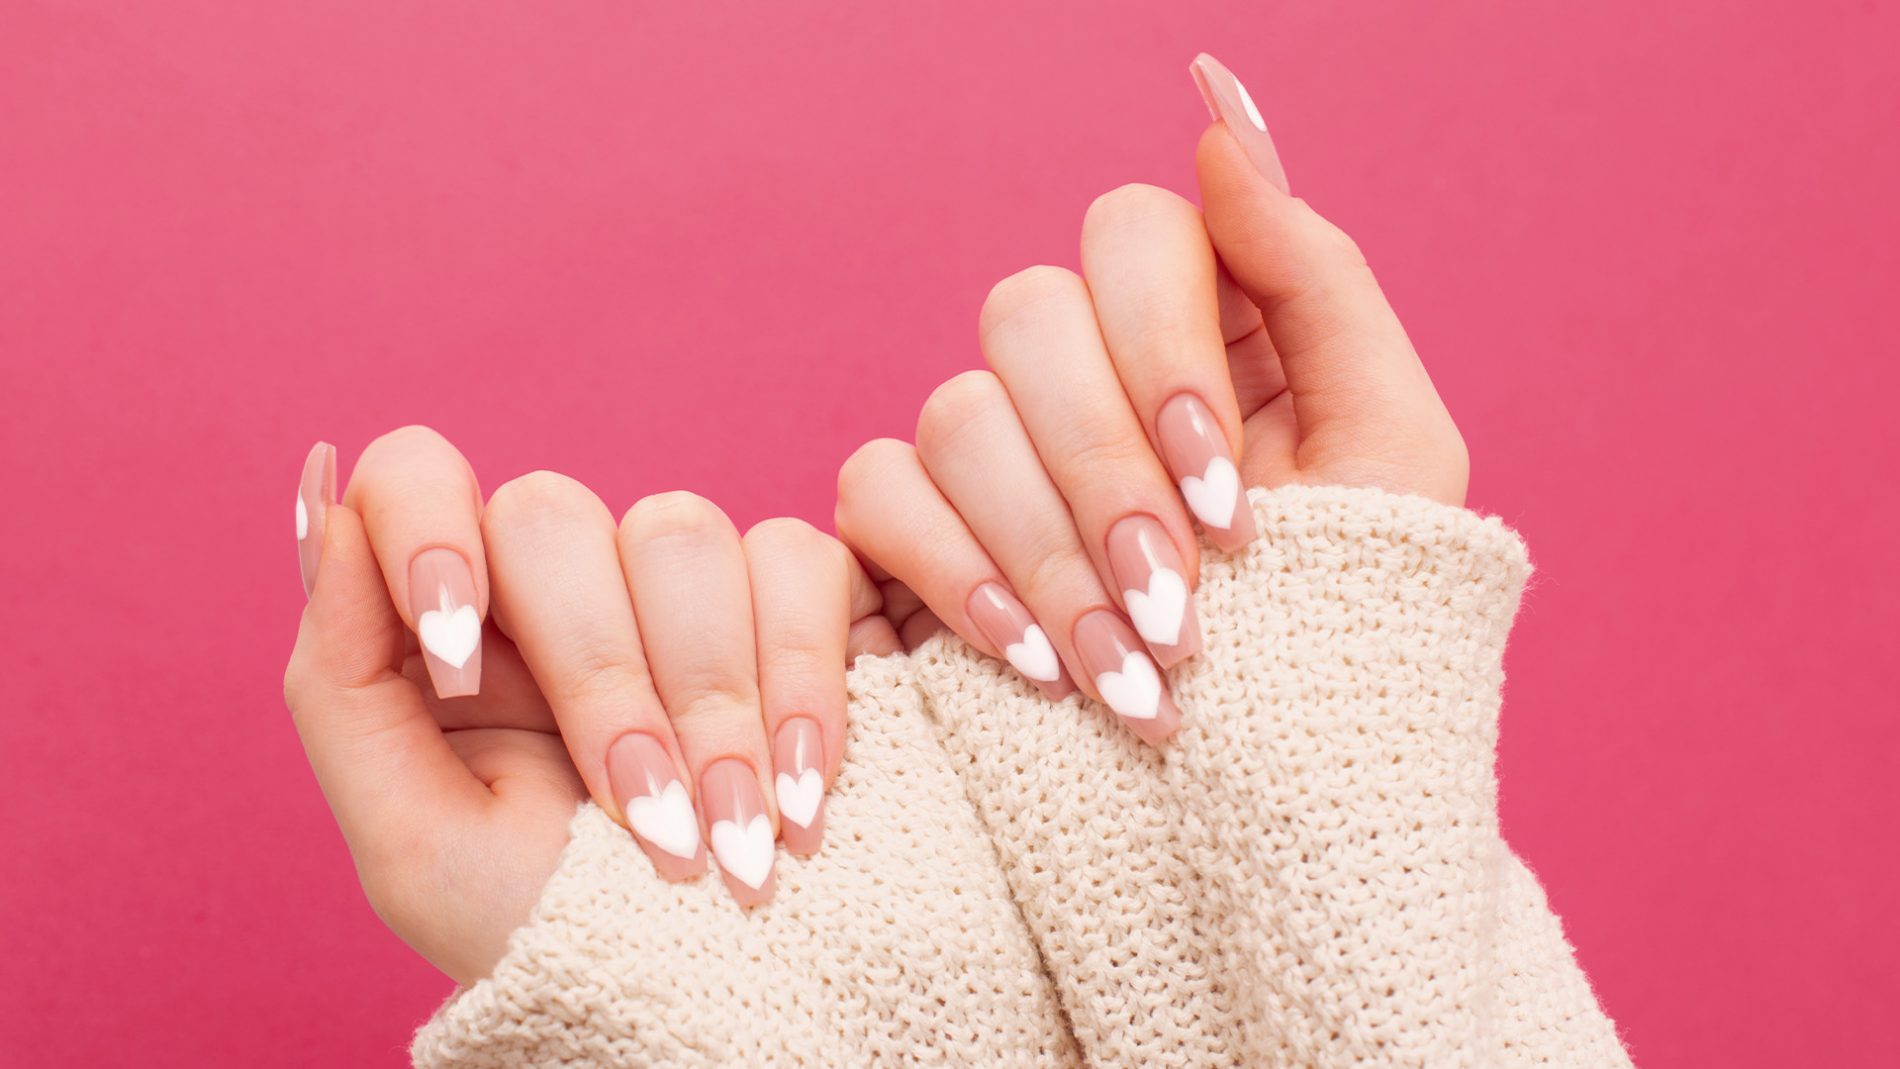 What are the 6 basics nail art designs?-smartinvestplan.com